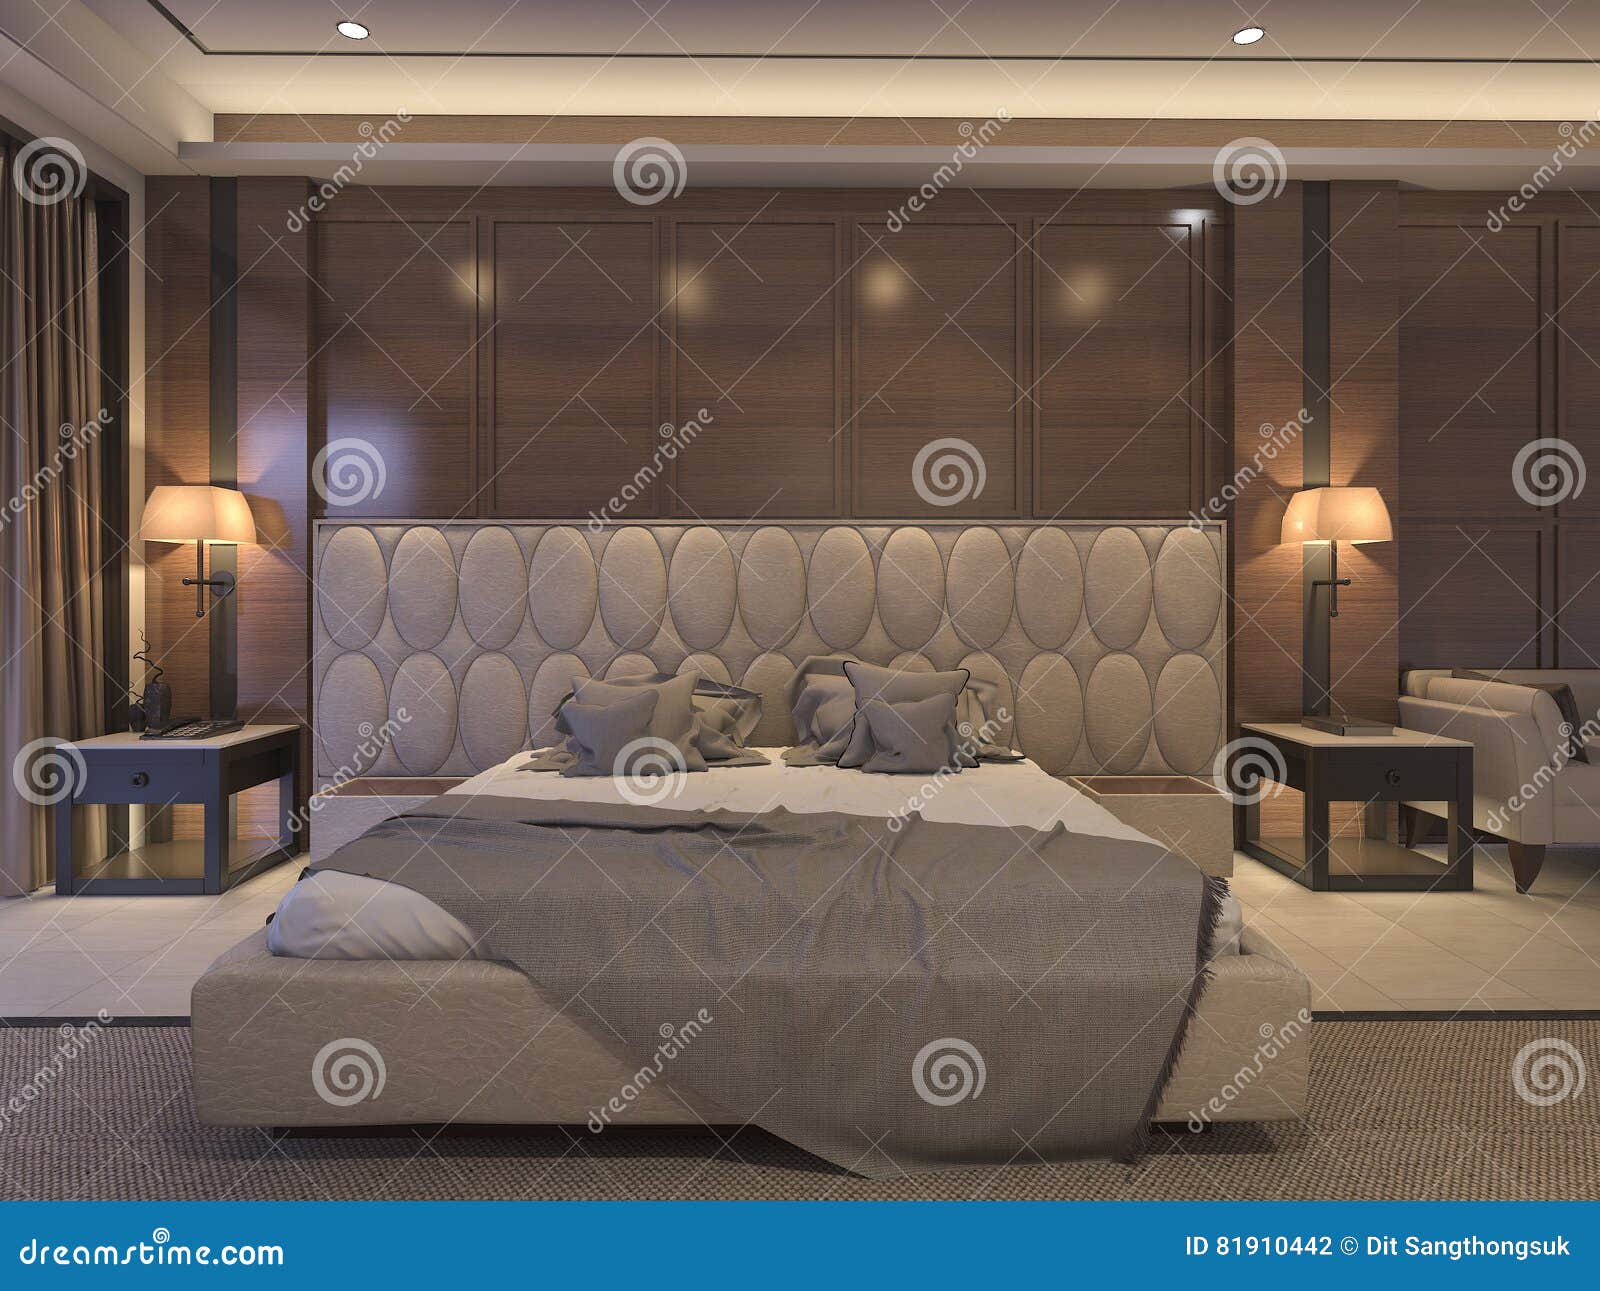 3d Rendering Classic Bedroom With Luxury Decor And Romantic Bed